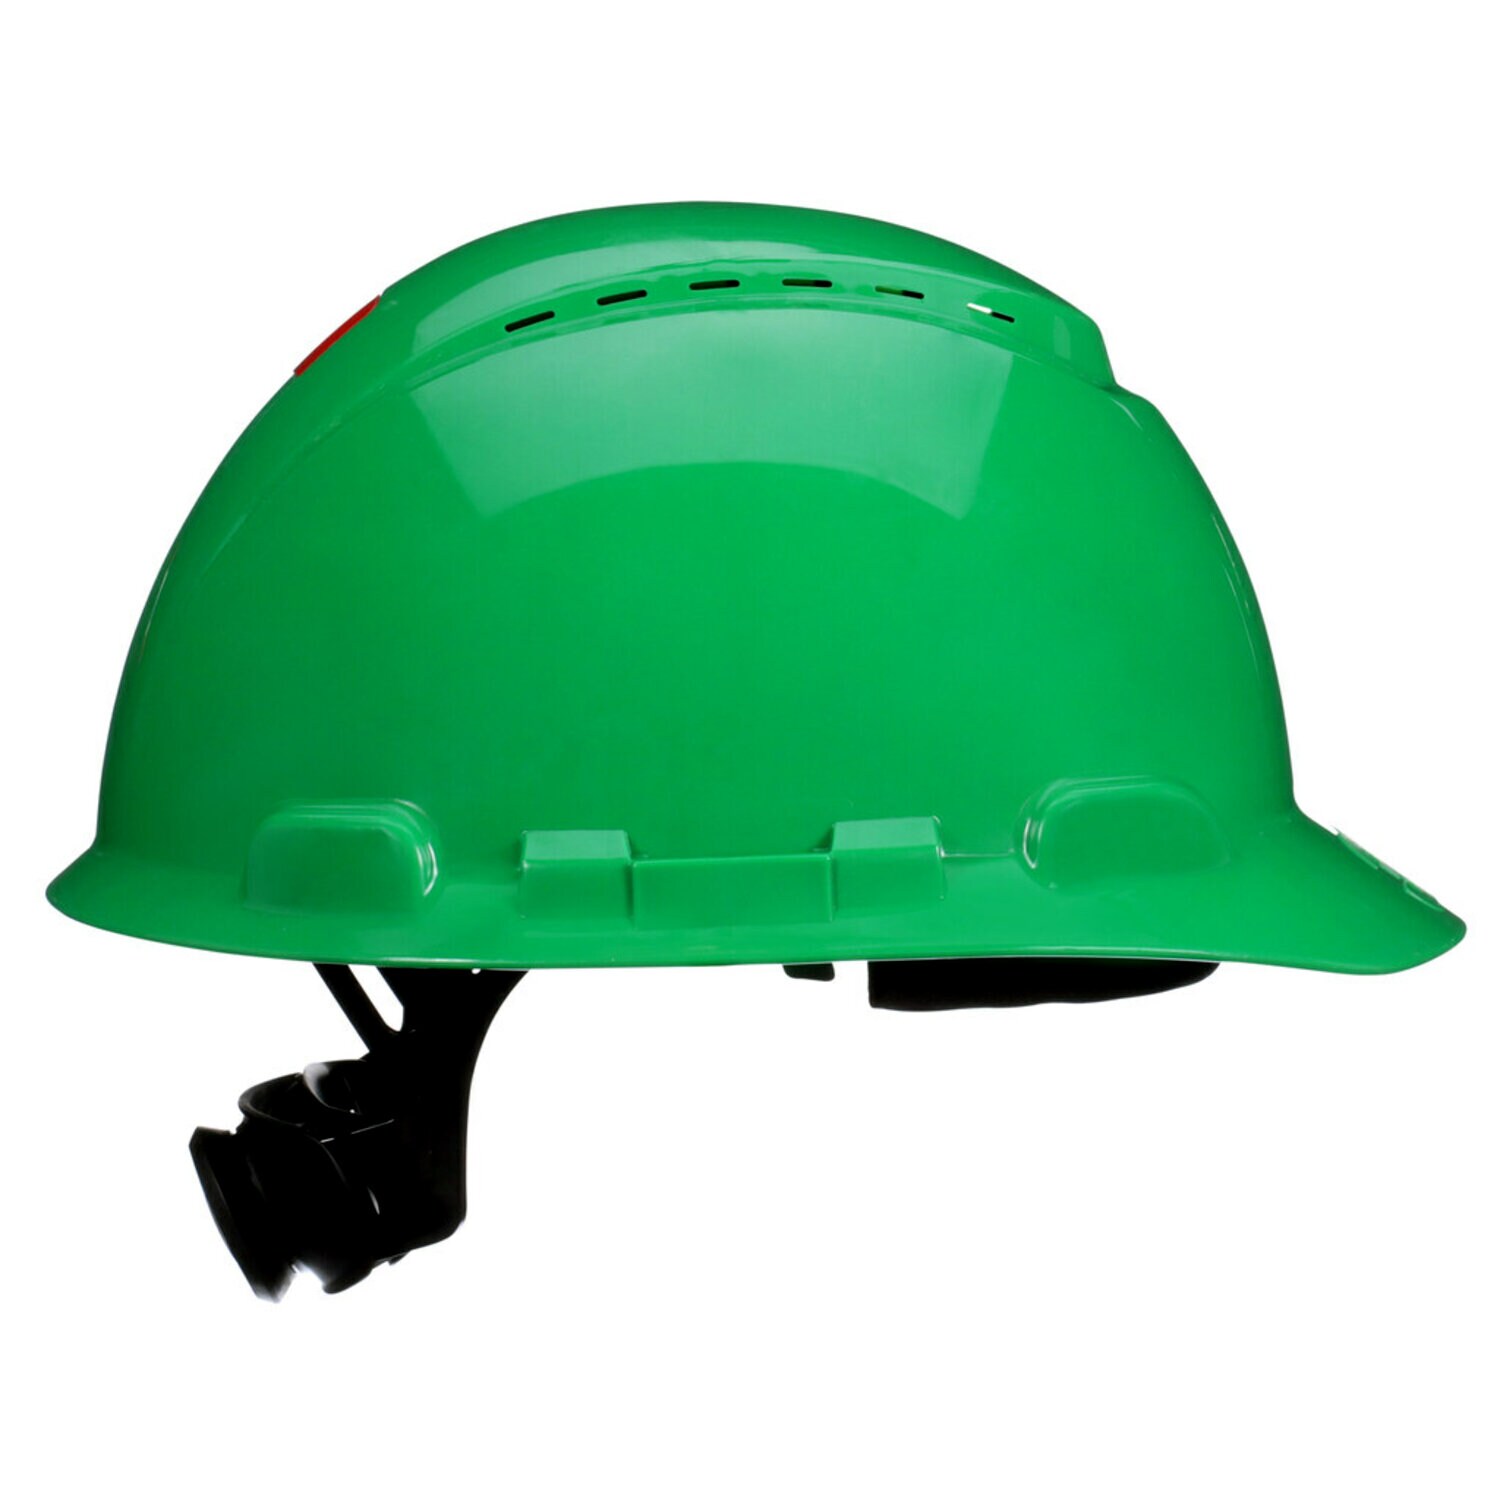 7100240003 - 3M SecureFit Hard Hat H-704SFV-UV, Green, Vented, 4-Point Pressure Diffusion Ratchet Suspension, with UVicator, 20 ea/Case